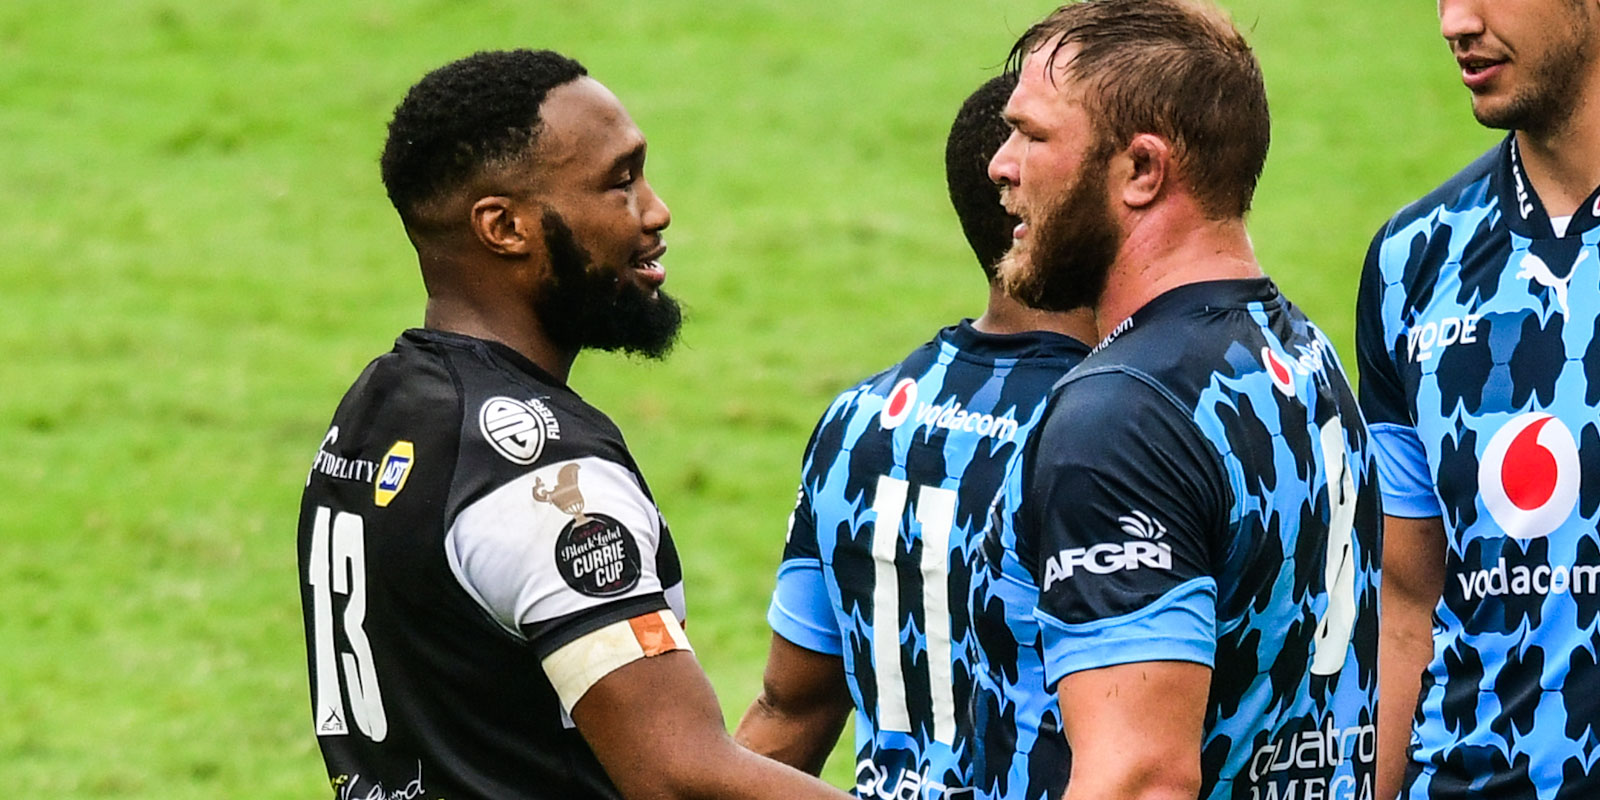 Who will lift the Carling Currie Cup on Saturday - Lukhanyo Am or Duane Vermeulen?